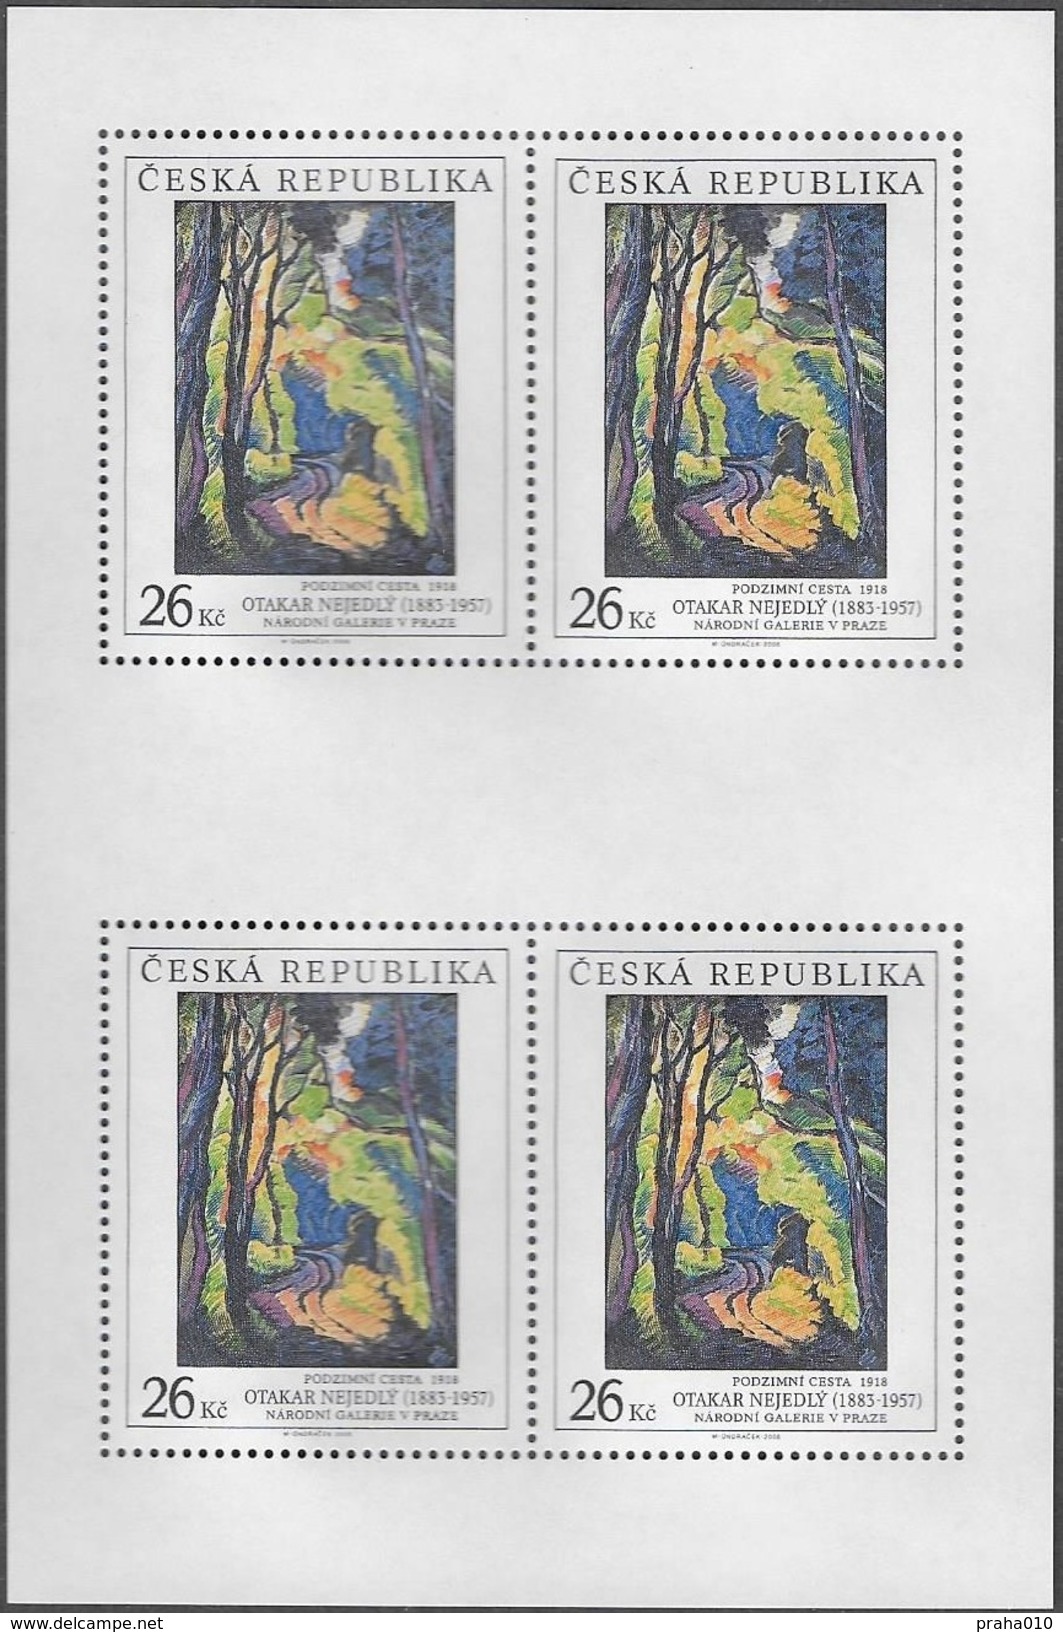 Czech Rep. / Stamps (2008) 0579 PL B: Otakar Nejedly (1883-1957) "Autumn Road" (1918); (Different Perforation! RR!) - Errors, Freaks & Oddities (EFO)